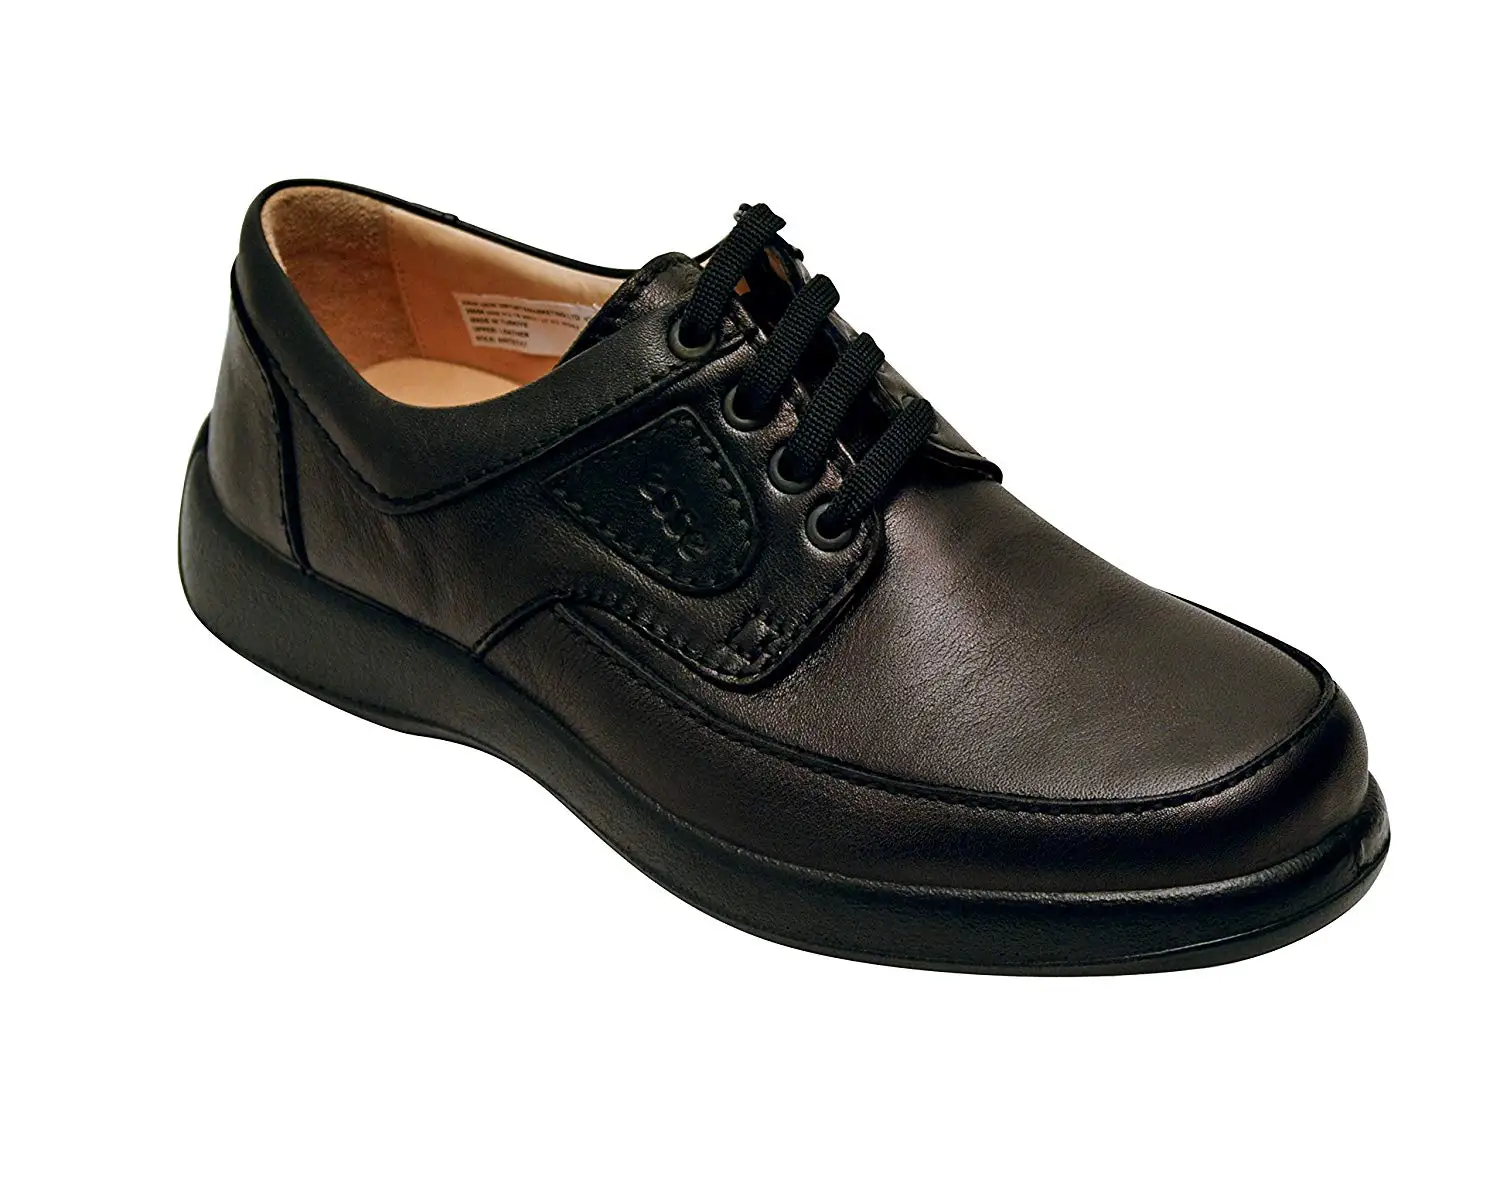 Lace Up Comfort Oxford Shoes,Featuring Soft Hony Hair at Vamp Ulite Womens Pieced Cowhide Leather Upper